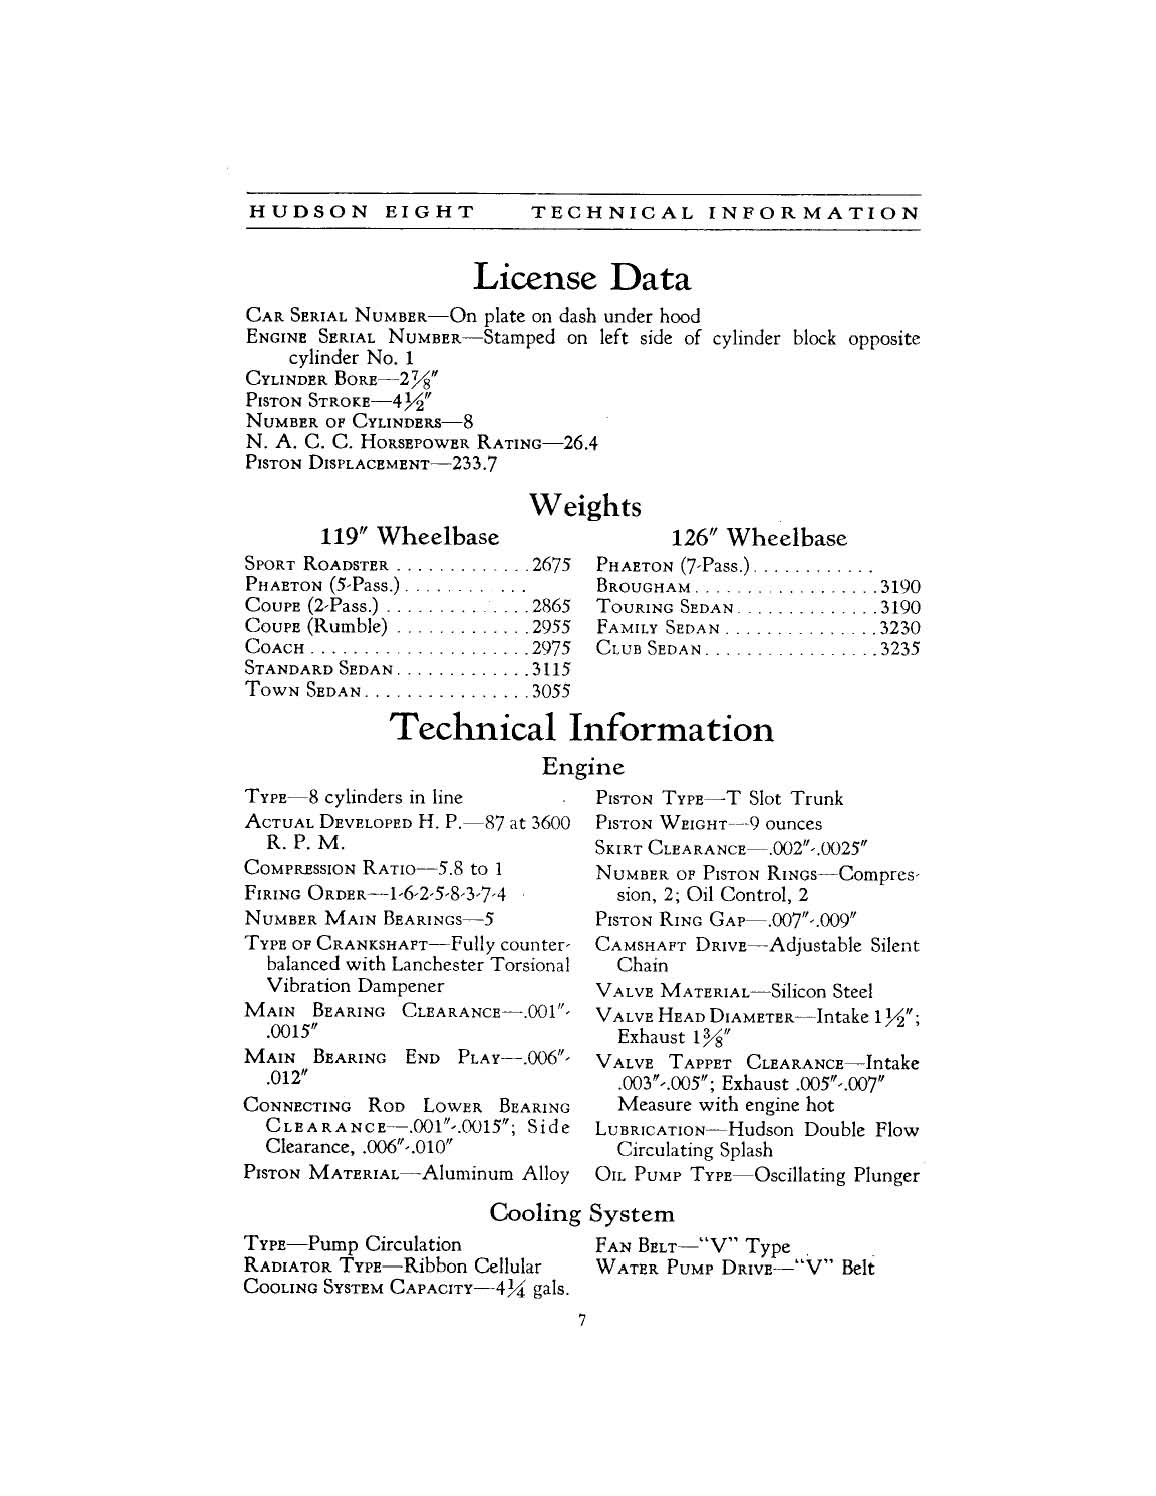 1931 Hudson 8 Instruction Book Page 25